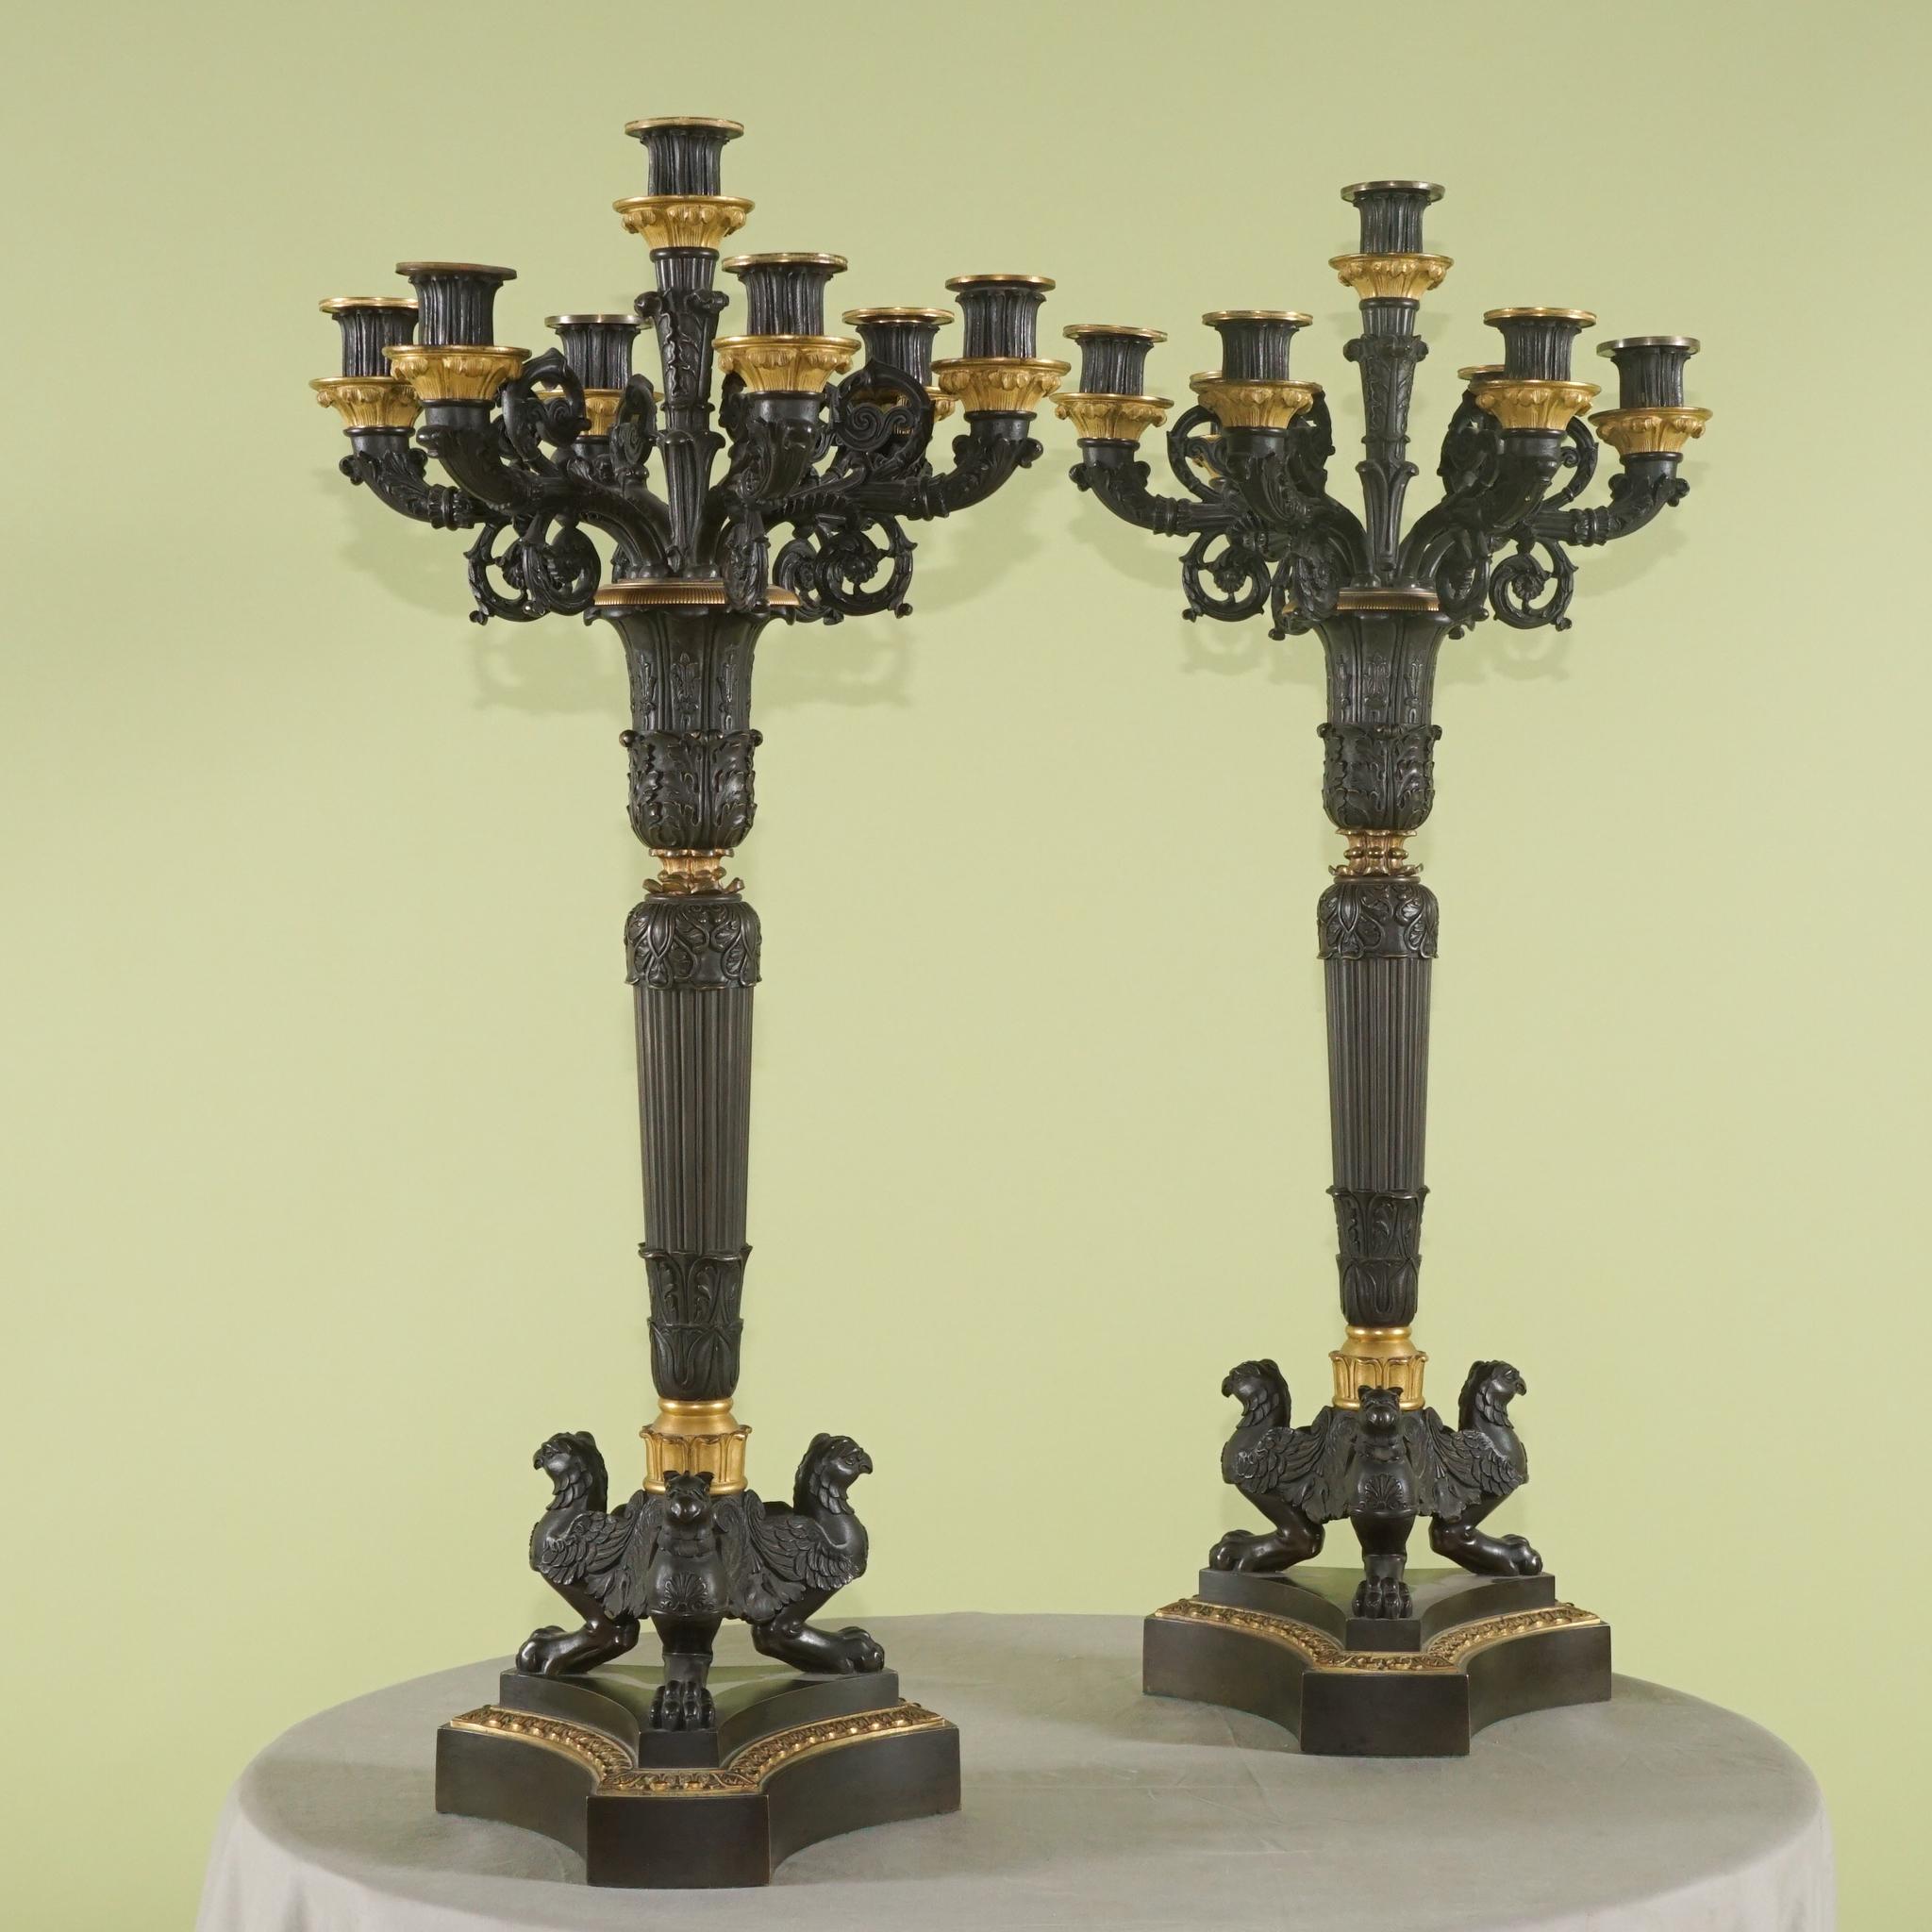 This impressive pair of candelabra made in the era of Napoleon III in France circa 1870 are very powerful and impressive. Heavily cast with references to the classical past and profusely covered with acanthus leaves and pelmets the set is